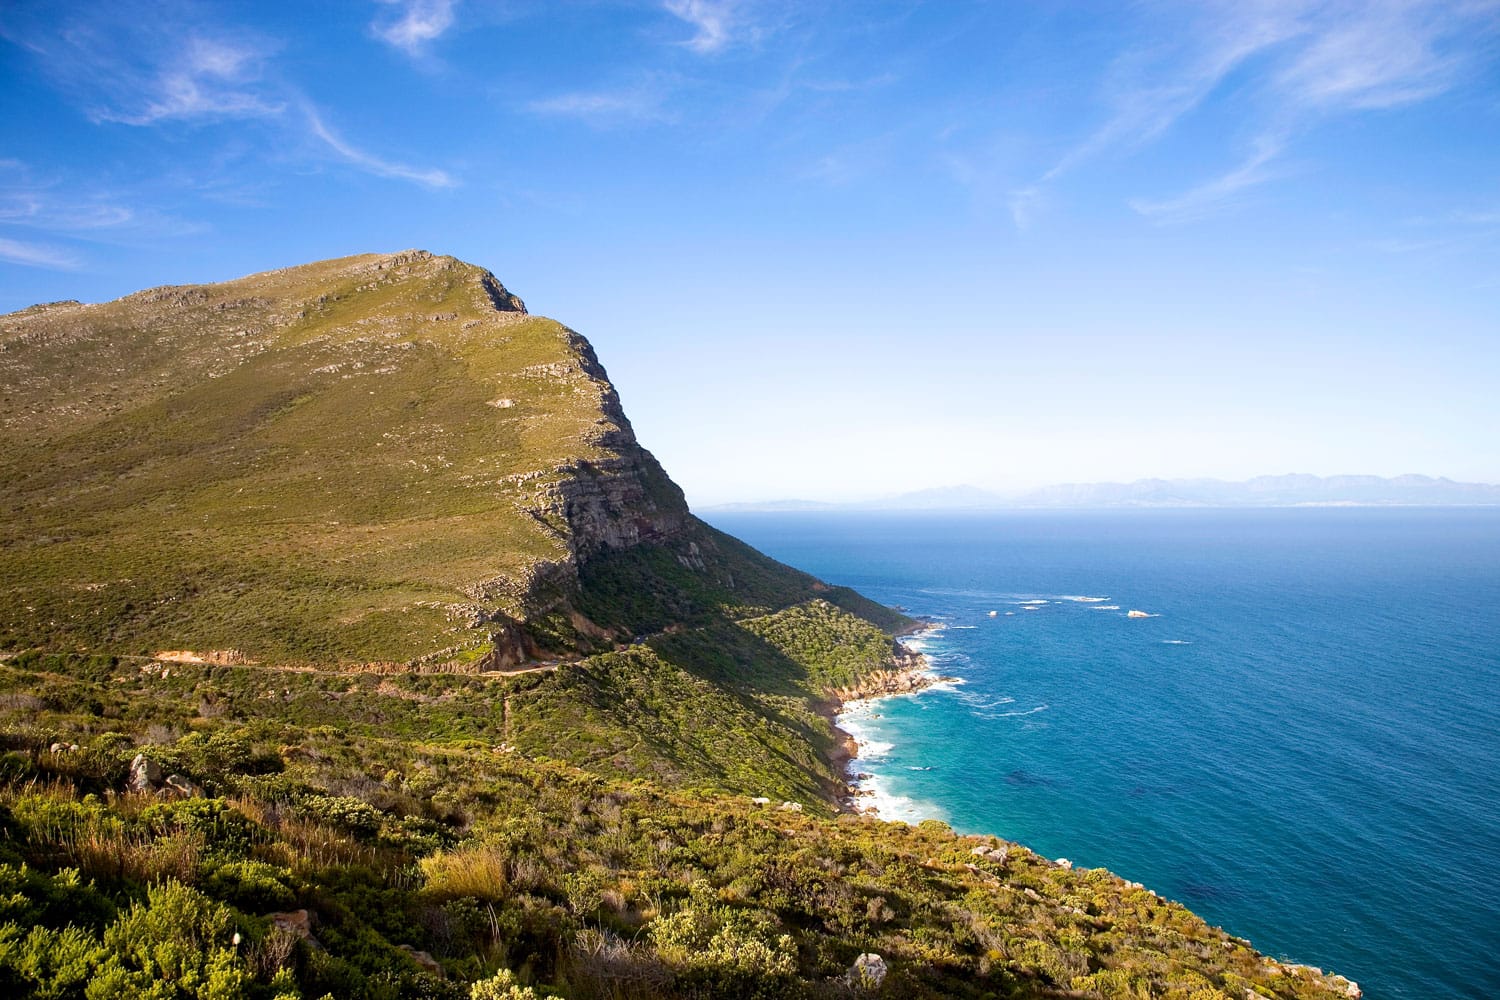 The Cape of Good Hope, South Africa.